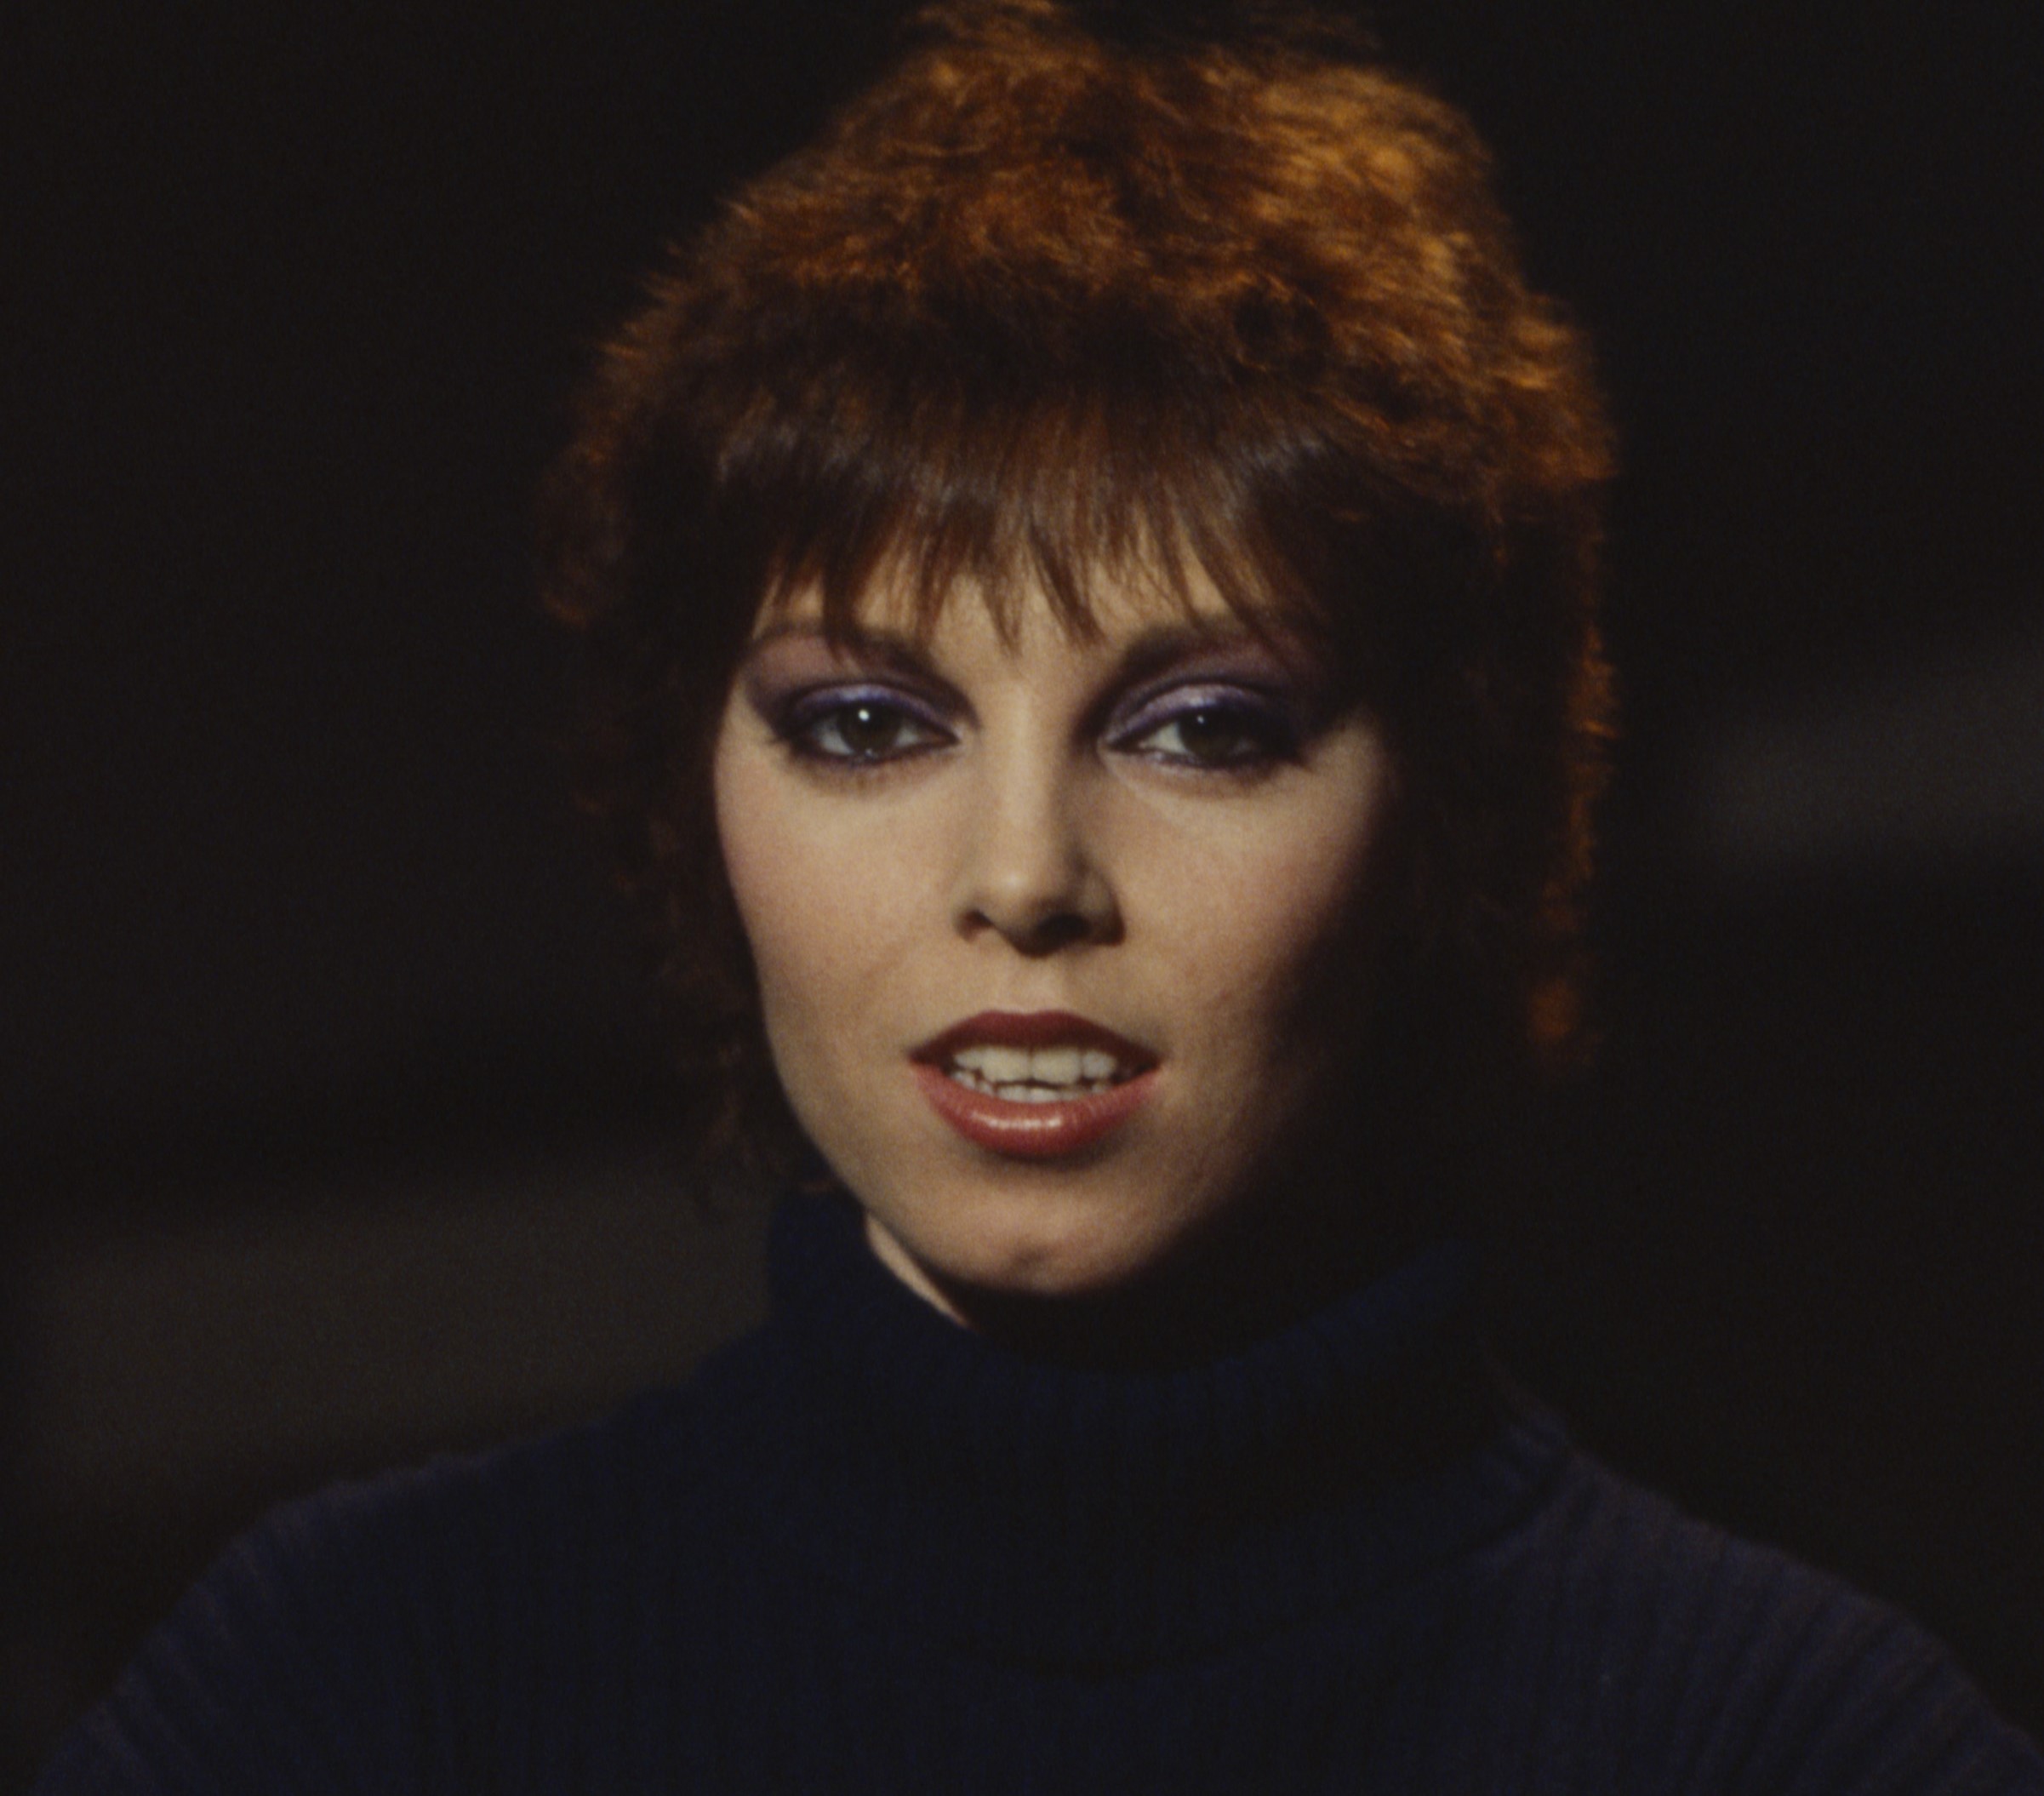 "Hit Me With Your Best Shot" singer Pat Benatar wearing a sweater